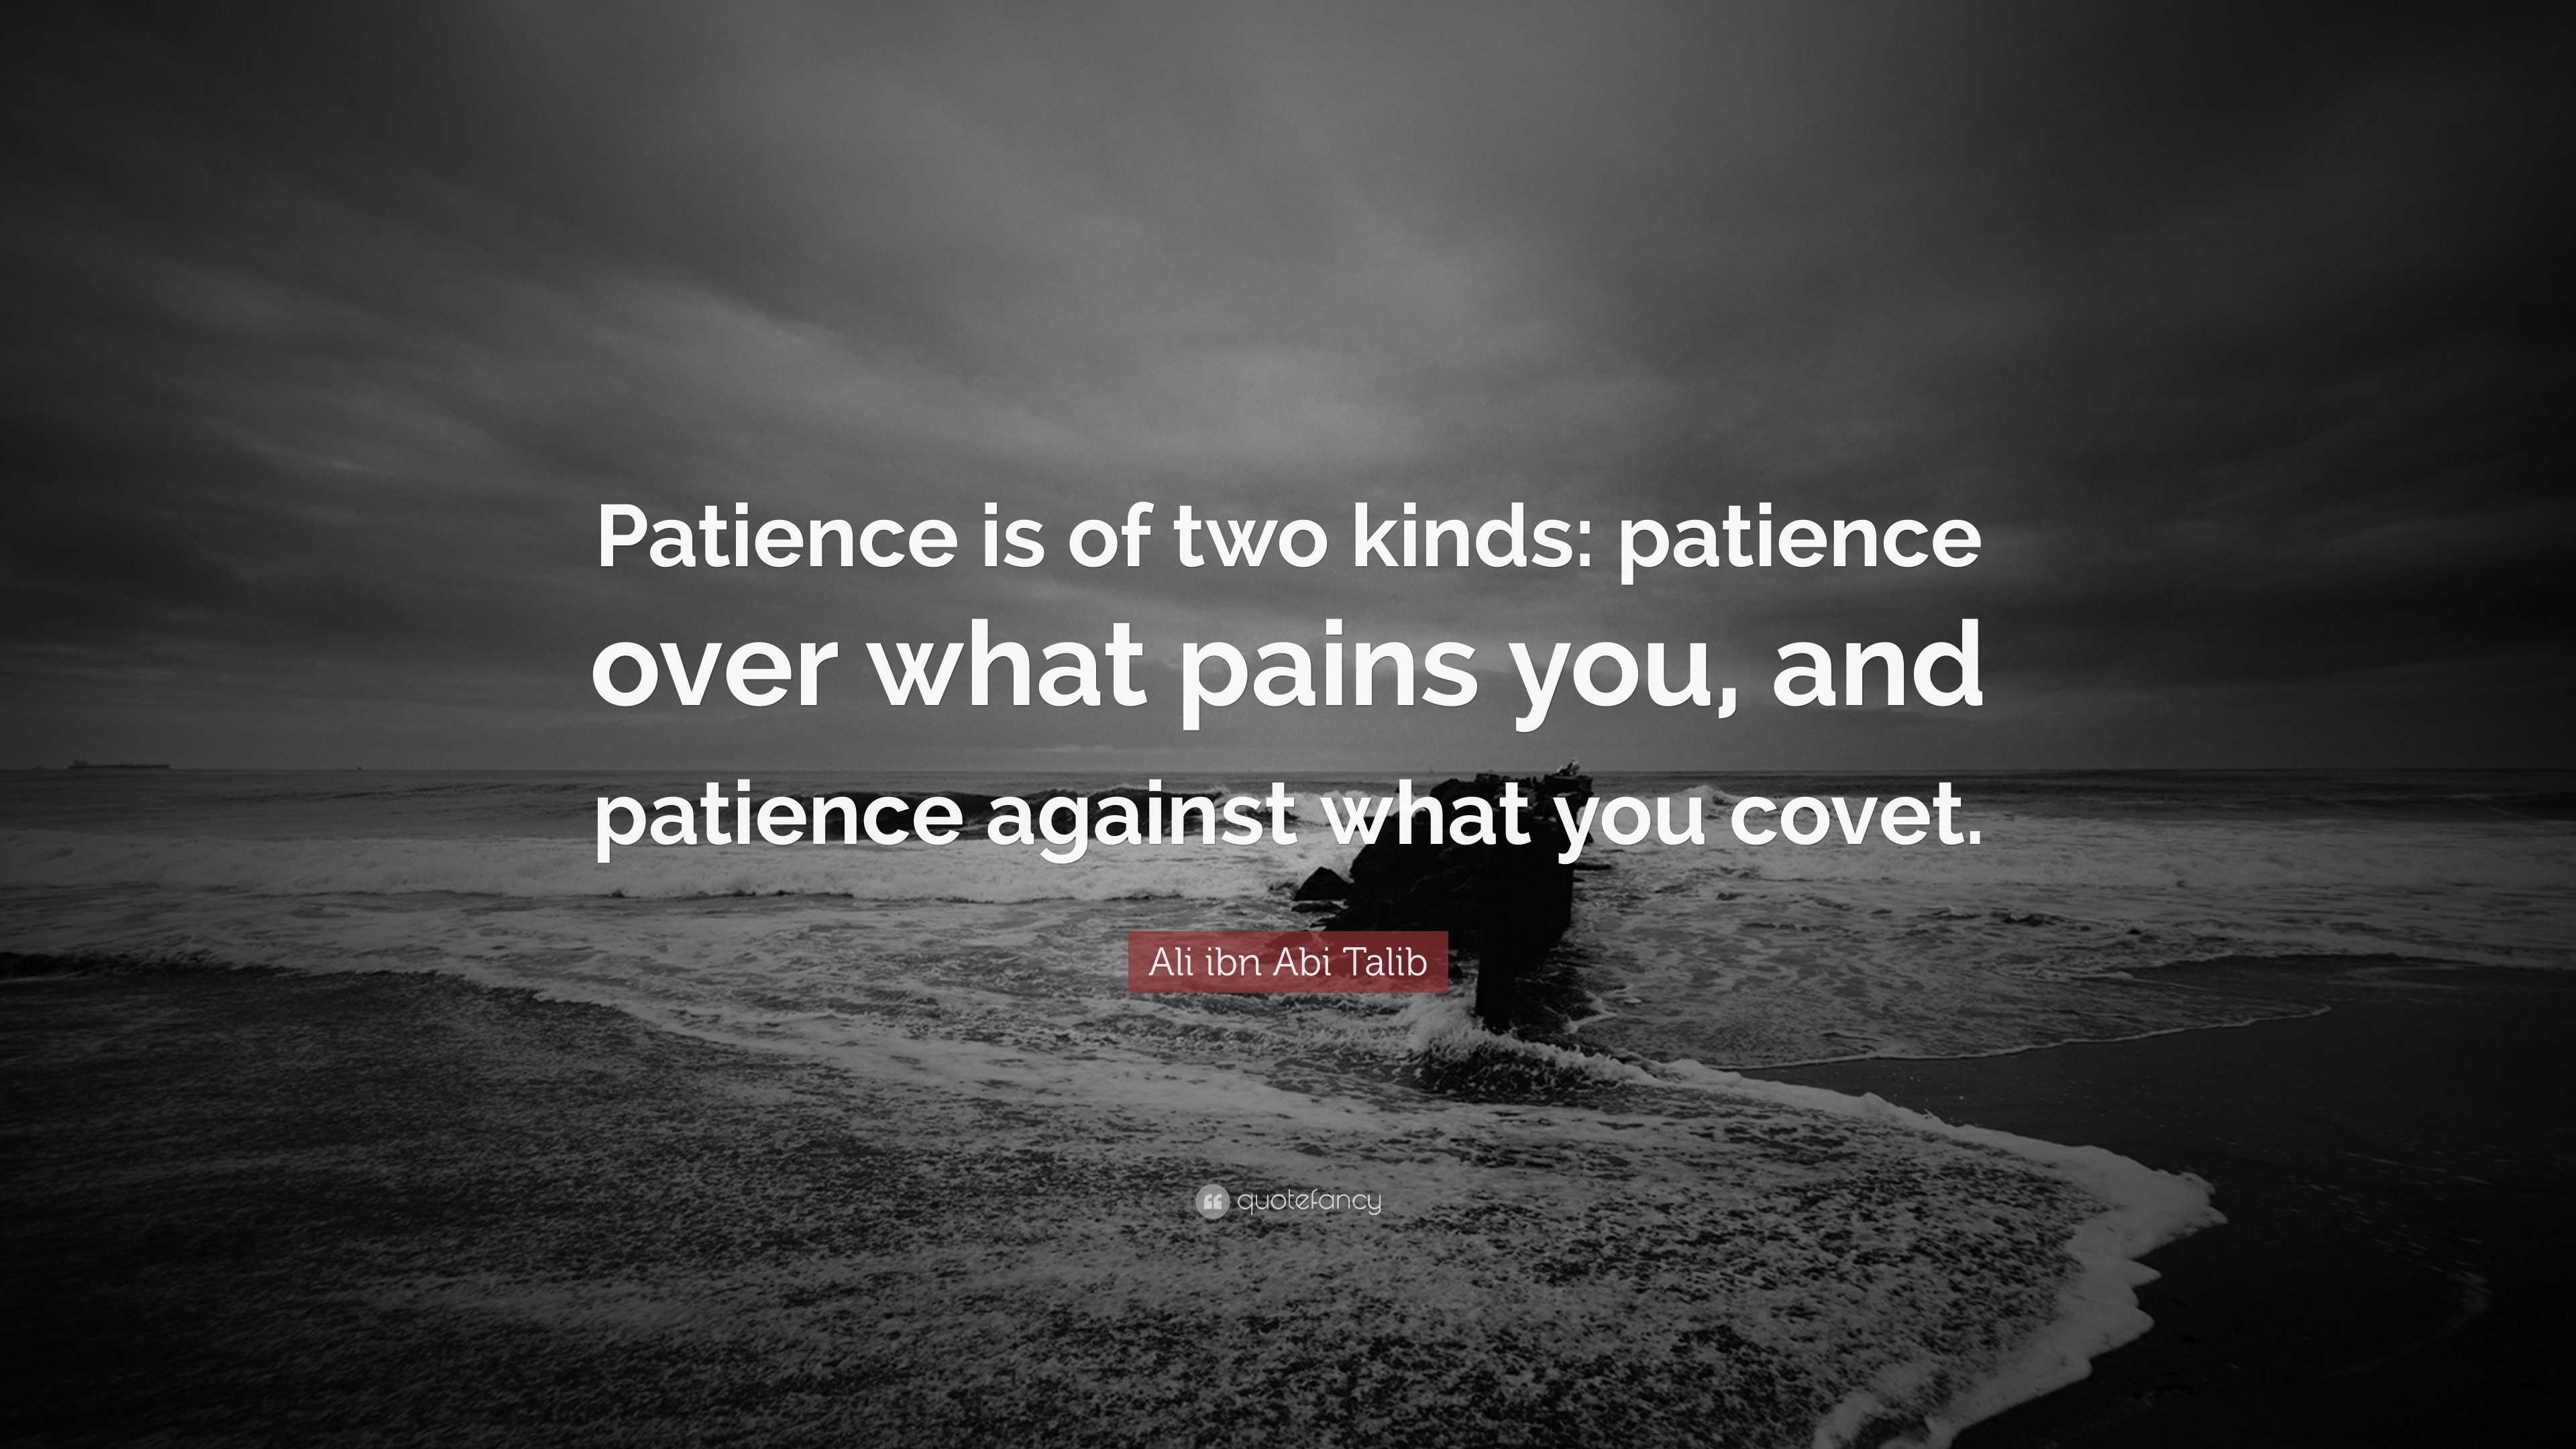 Ali ibn Abi Talib Quote: u201cPatience is of two kinds: patience over 